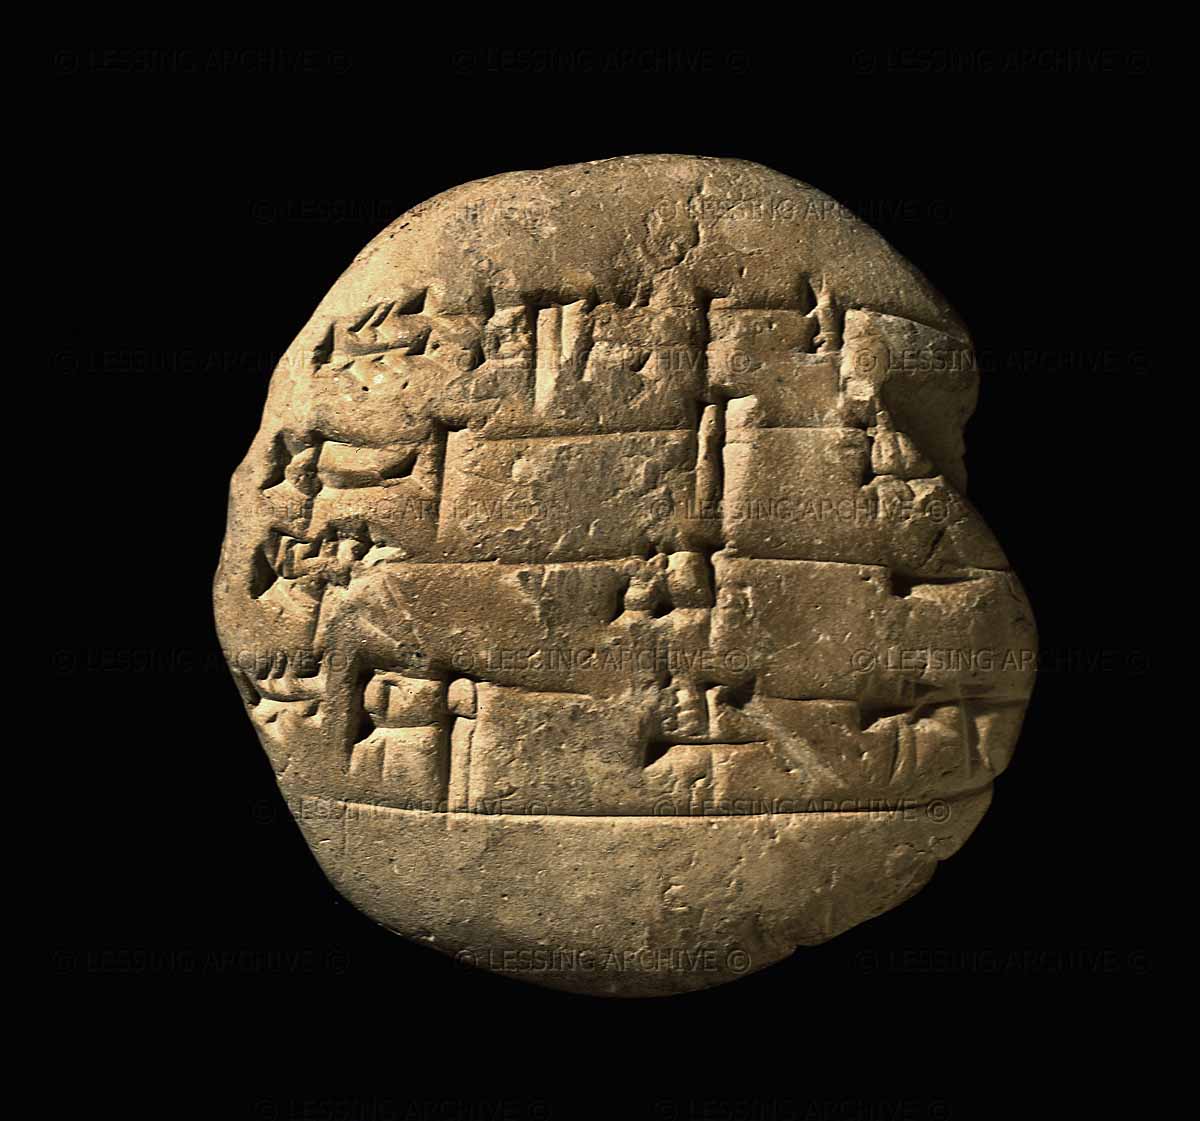 the making of a scribe, tablet with schoolwork, Old Babylonian artefact, probably from southern Iraq, 1900-1700 B.C., schooling began at an early age in the "tablet-house" under an older student called "big brother", after completing their training, students became entitled to call themselves "scribes"